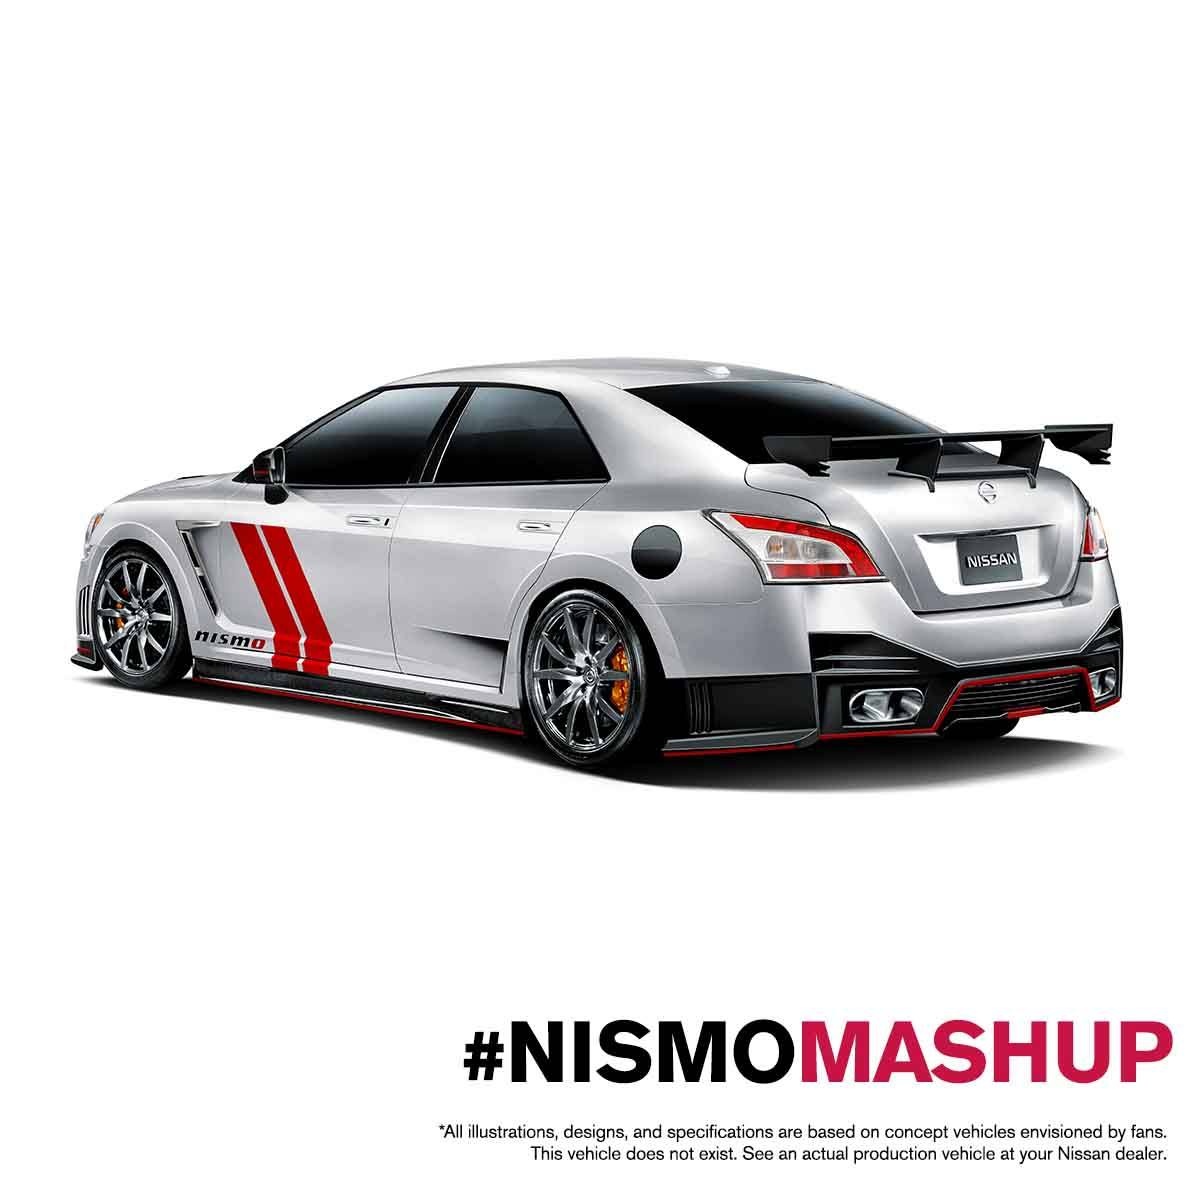 Nissan drawing competition #9